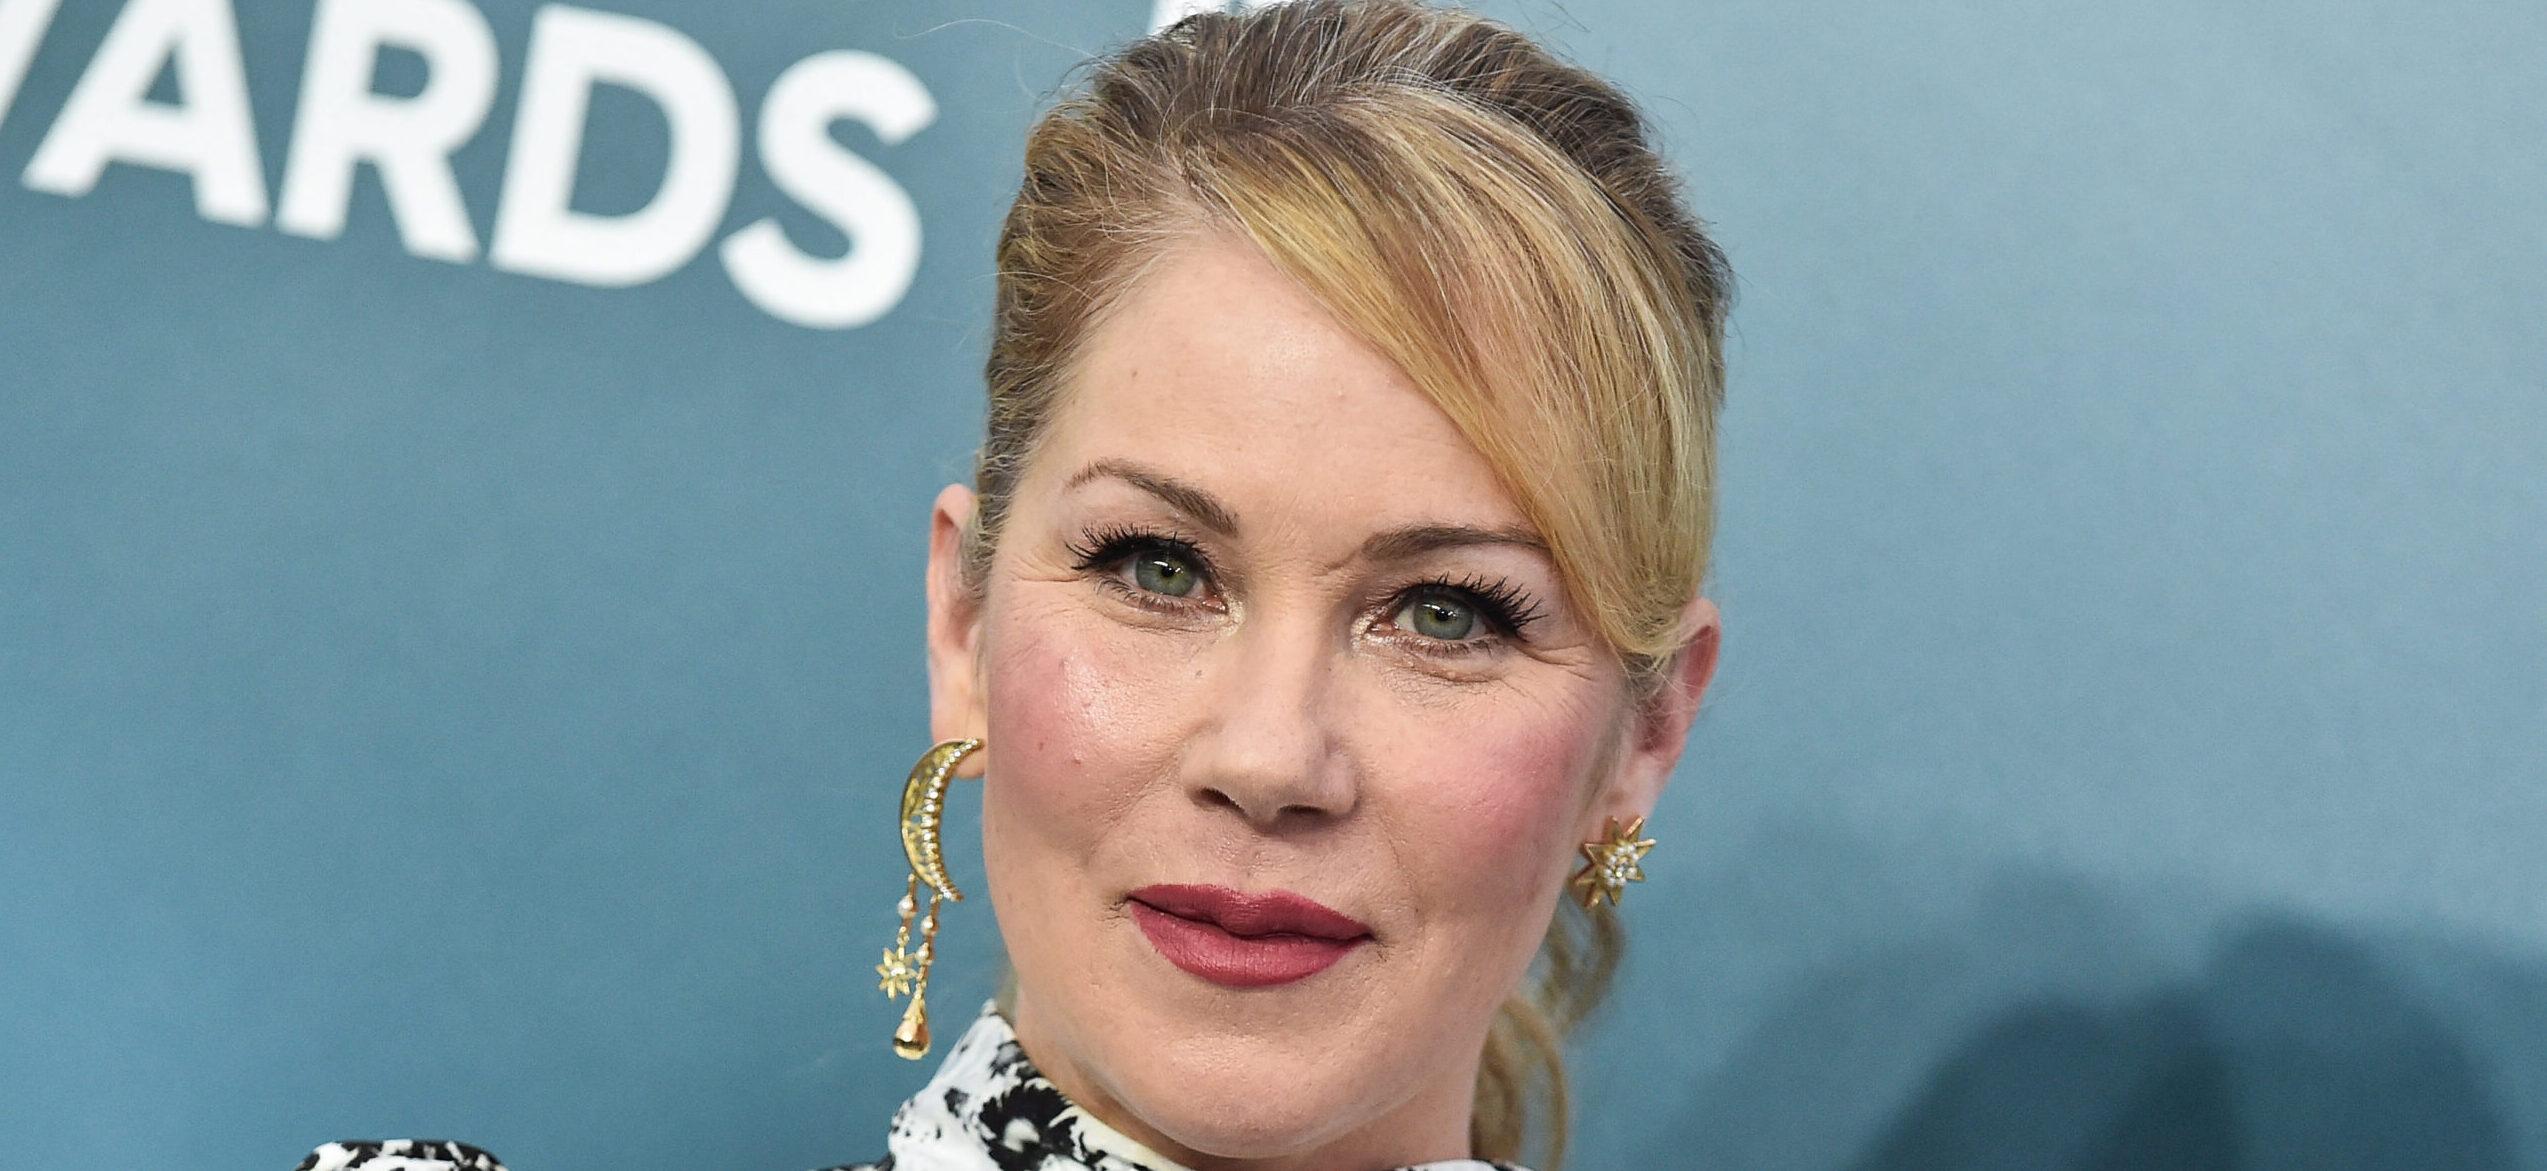 Christina Applegate at the 26th Annual Screen Actors Guild Awards - Arrivals